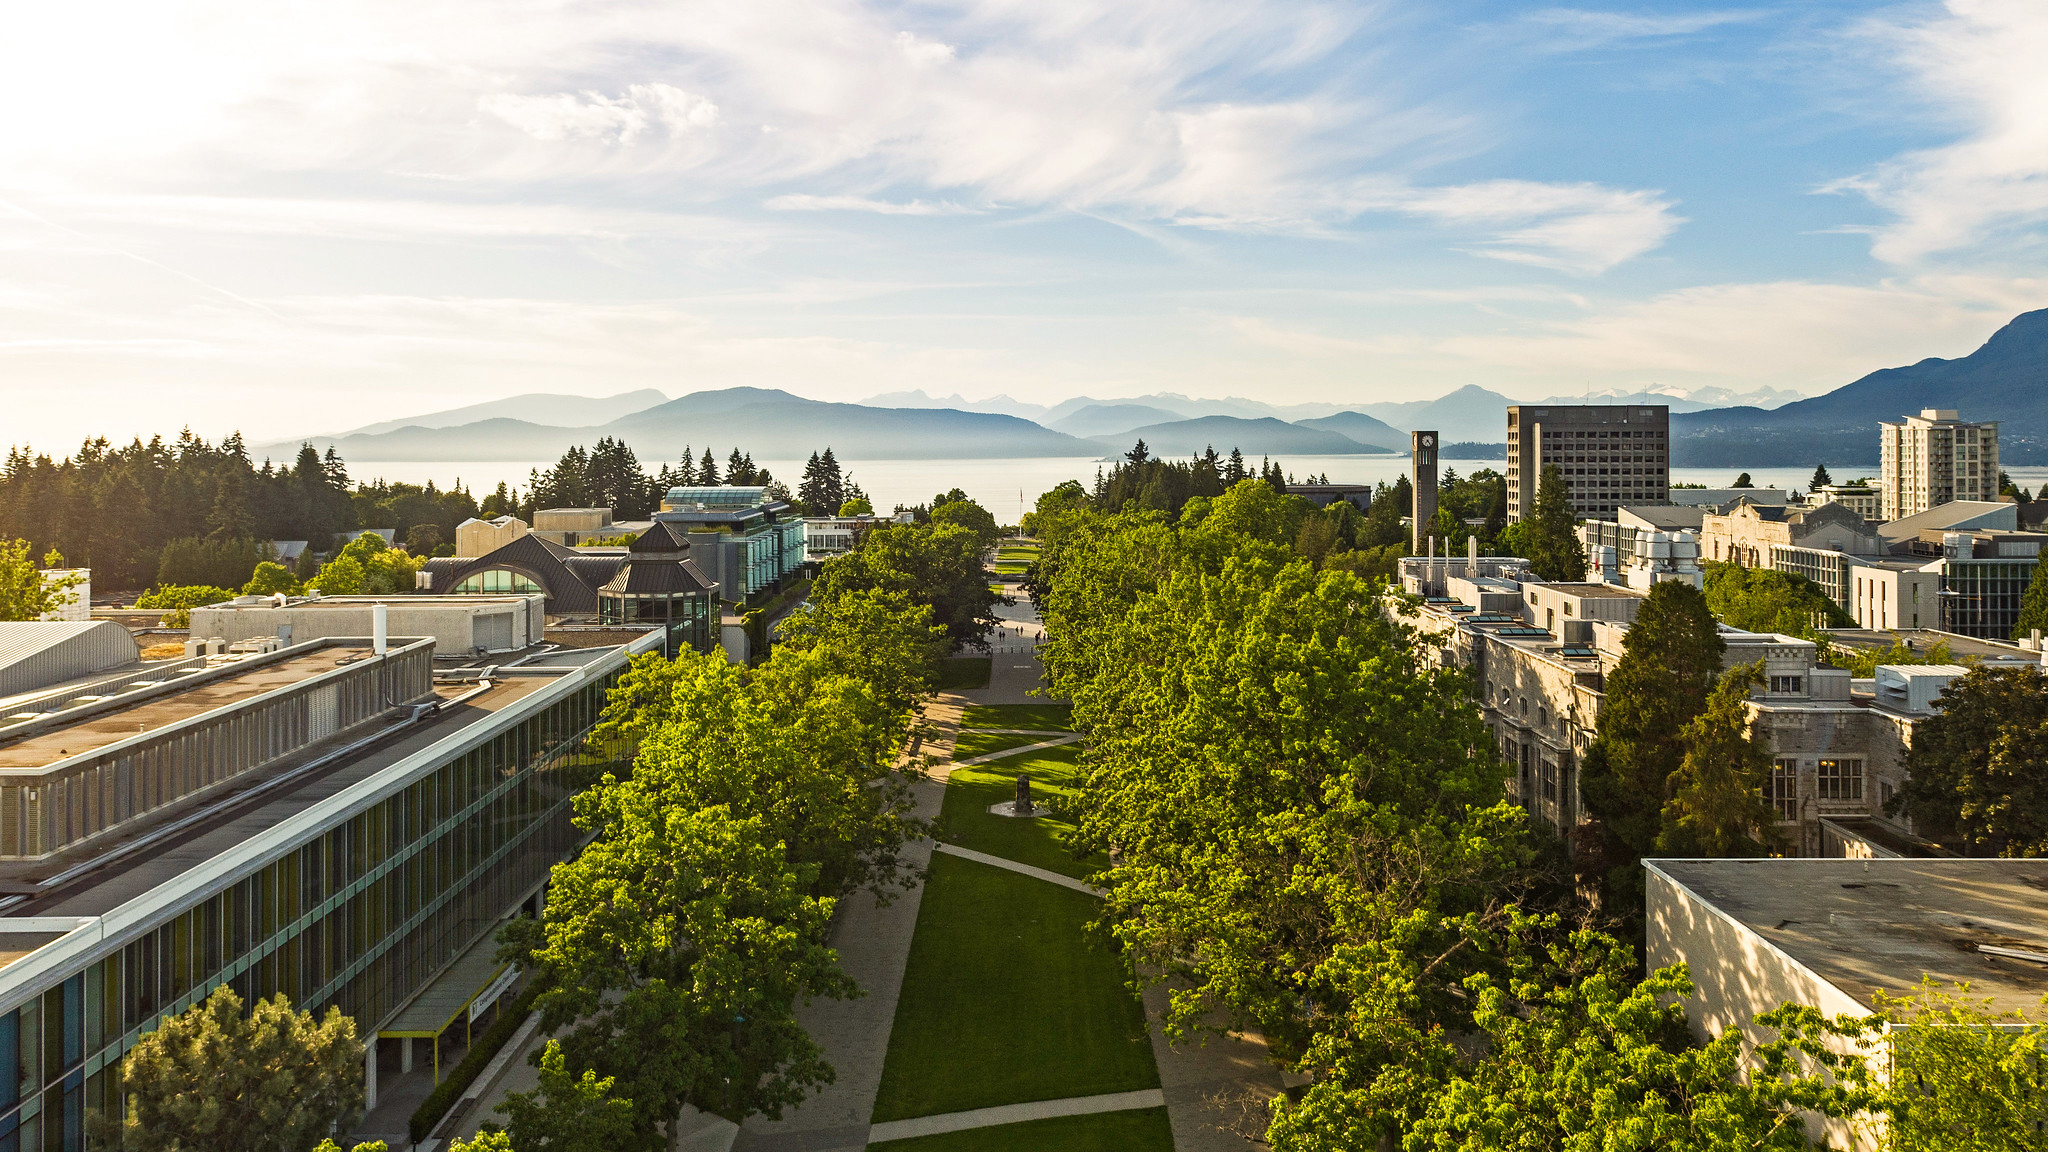 This picture shows the Main Mall at the UBC Vancouver campus looking out towards the Burrard Inlet. 